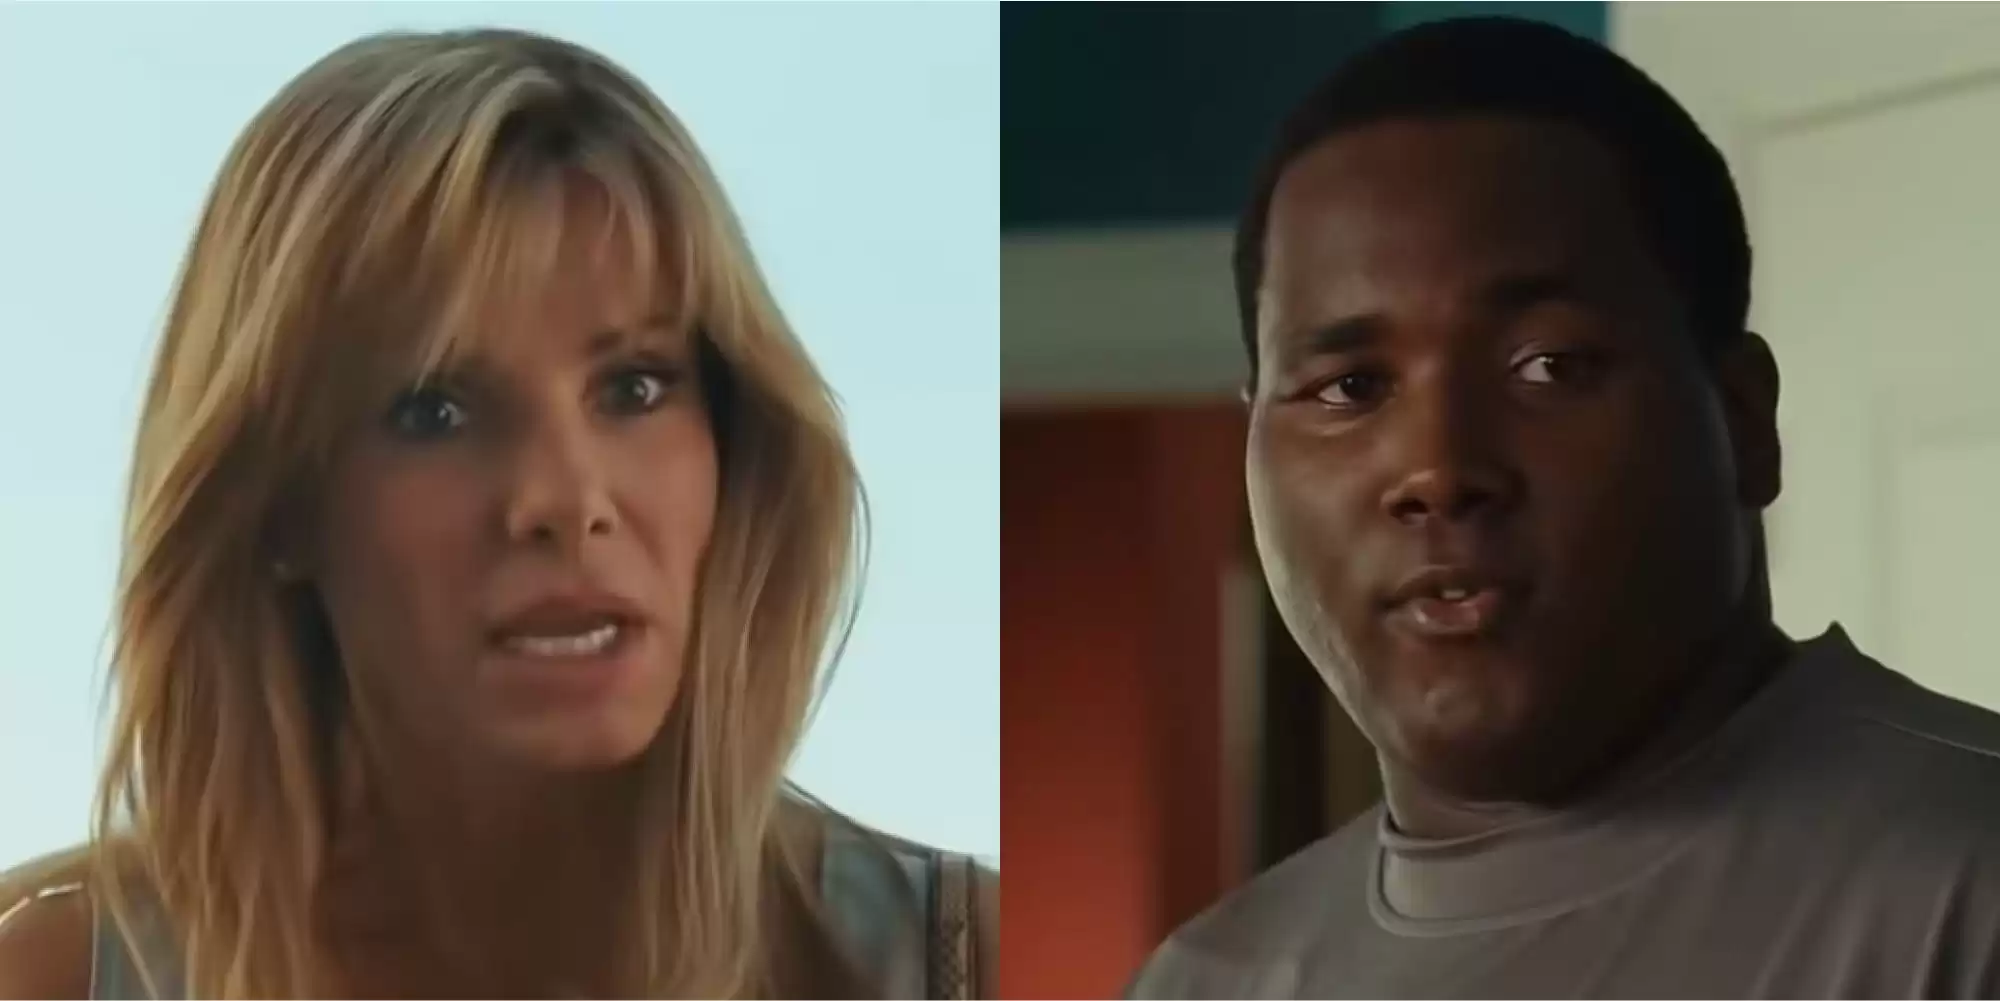 People Questioning Sandra Bullock's 'Blind Side' Role Amid Michael Oher's Accusations